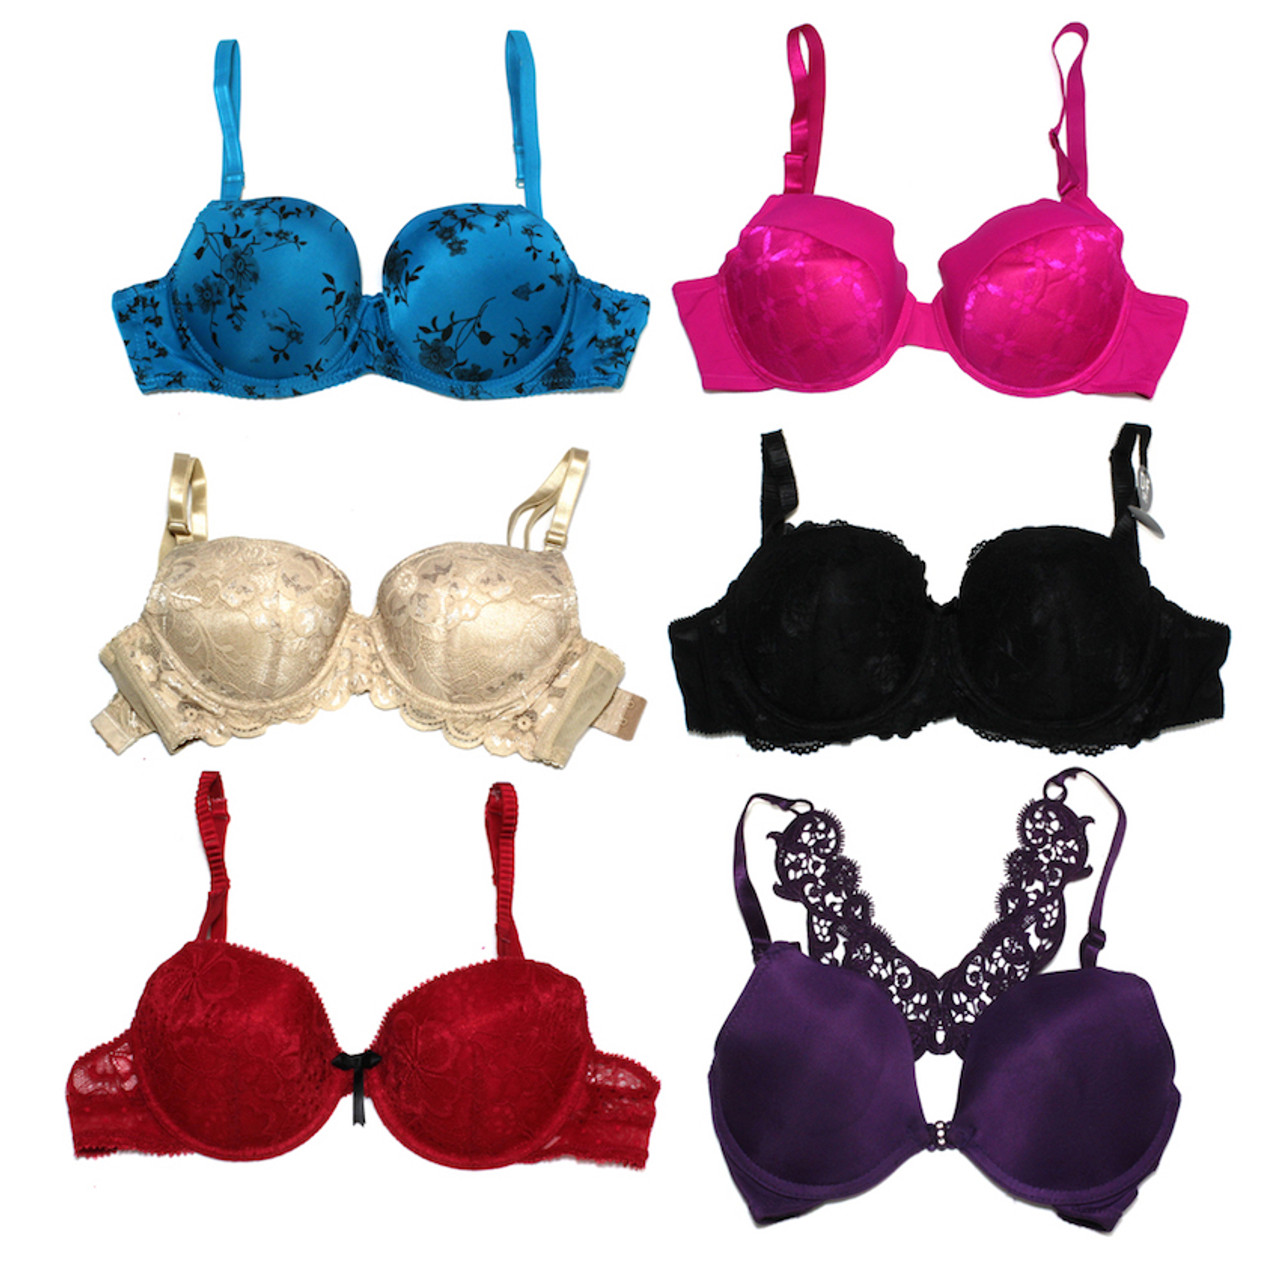 48 Wholesale Milan Lady's PusH-Up Underwire Bra In Assorted Sizes - at 